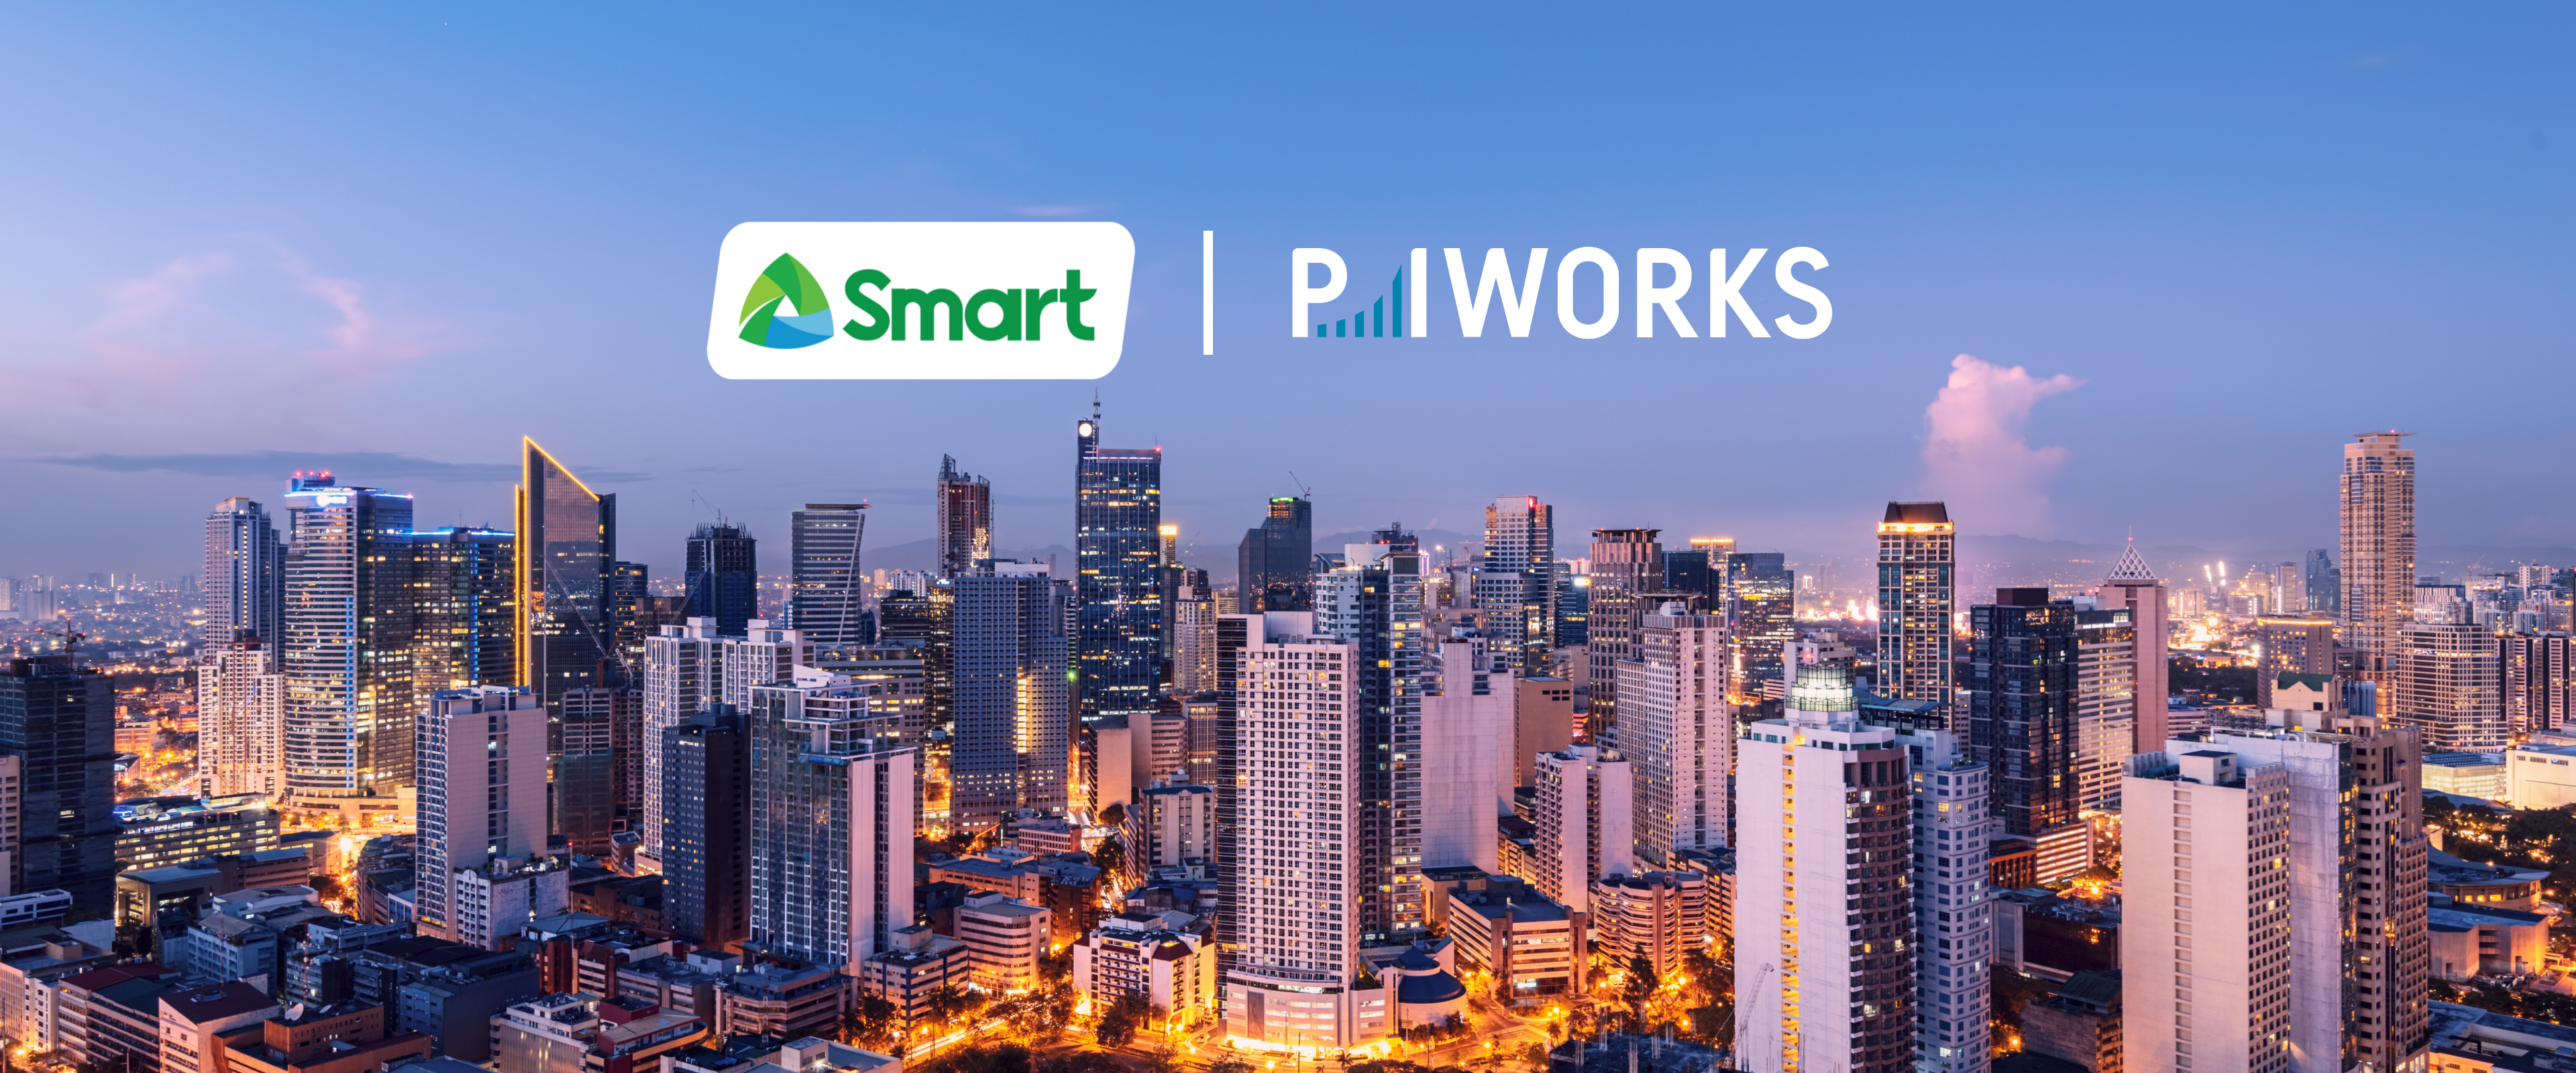 Smart, in collaboration with P.I. Works, won the APAC Operator Award for Best Example of Automation Deployment at the Futurenet Asia Awards 2022 